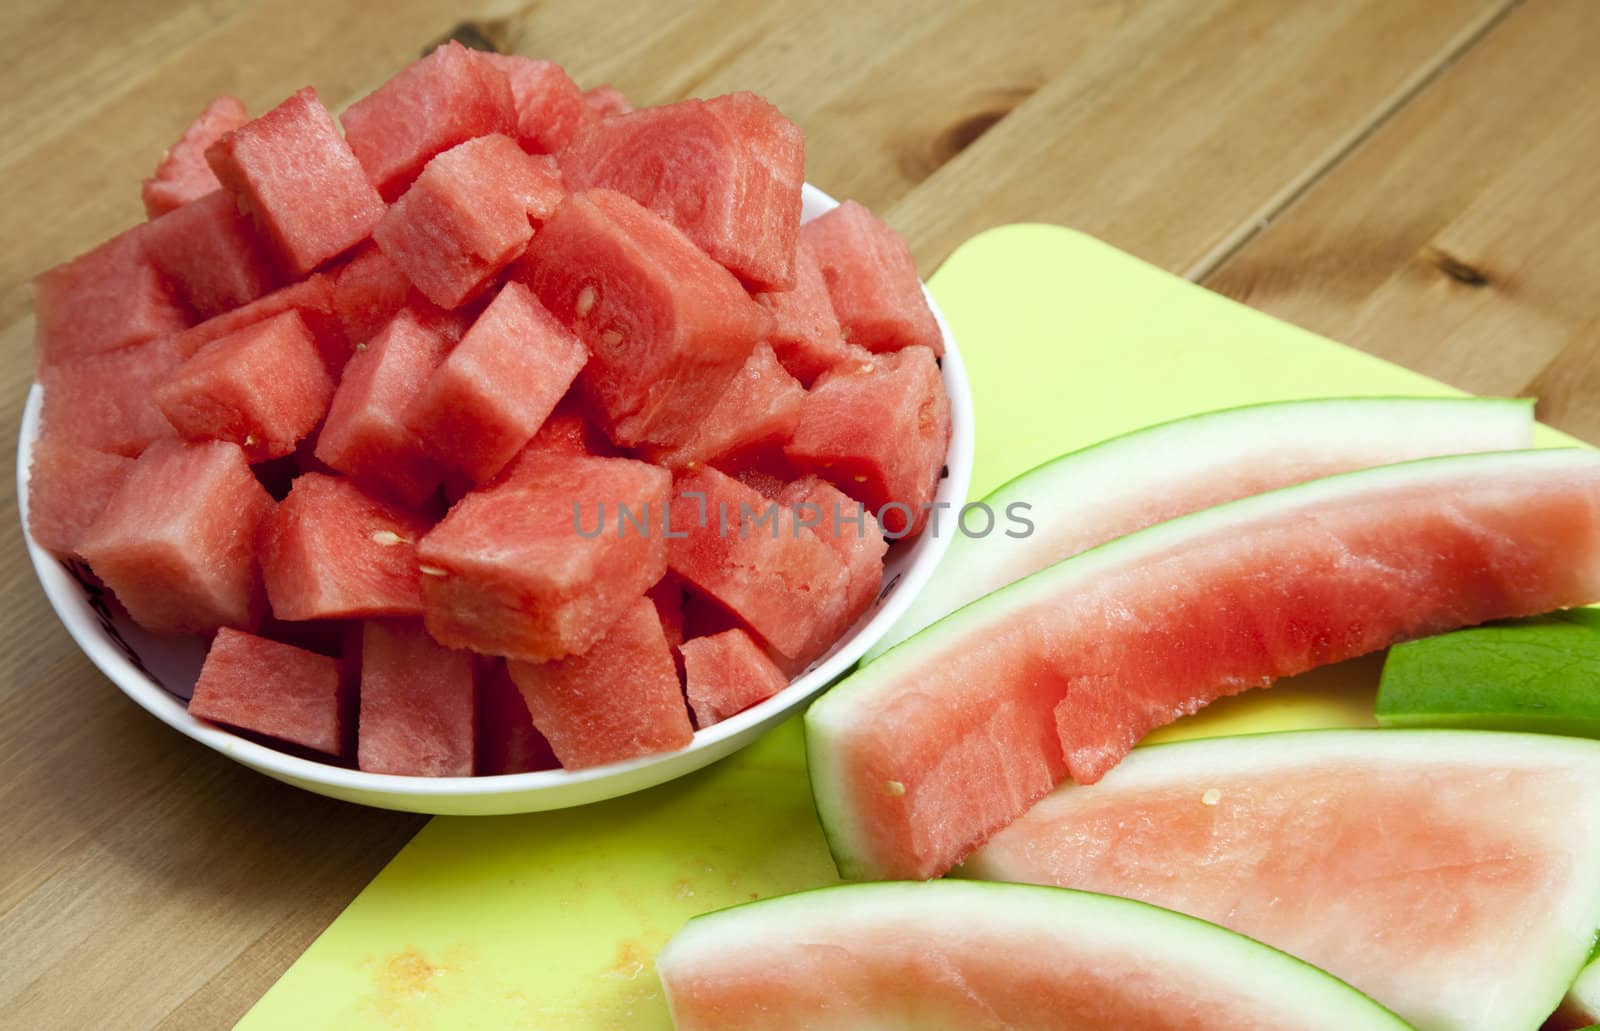 A bowl of freshly cut watermelon next to the rind